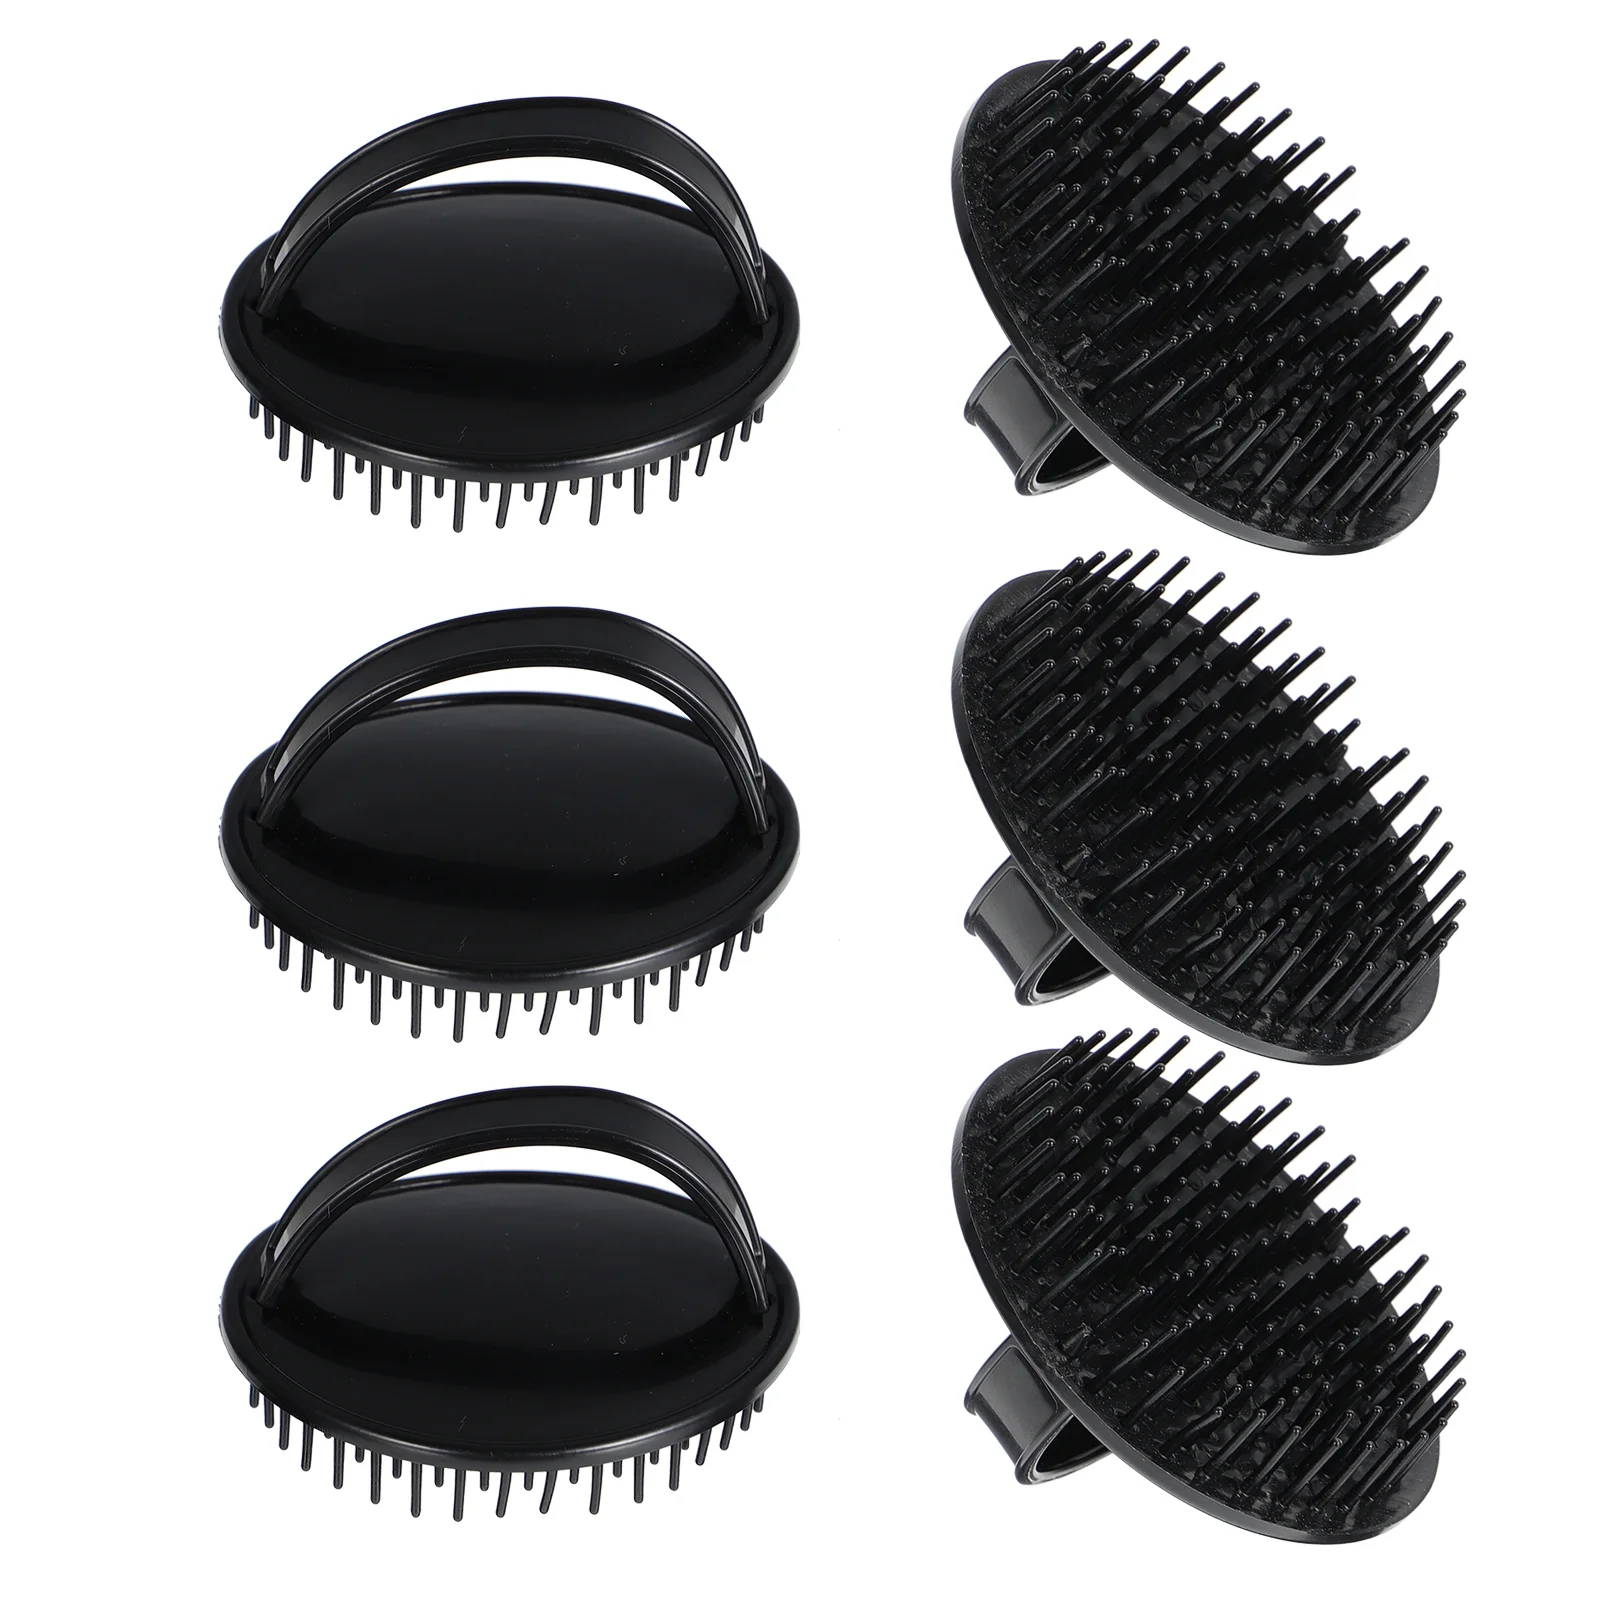 

6pcs Hair Scalp Scratcher Brush Care Comb Massaging Tool Hair Detangling Brush For Wet Dry Thick Curly Hair